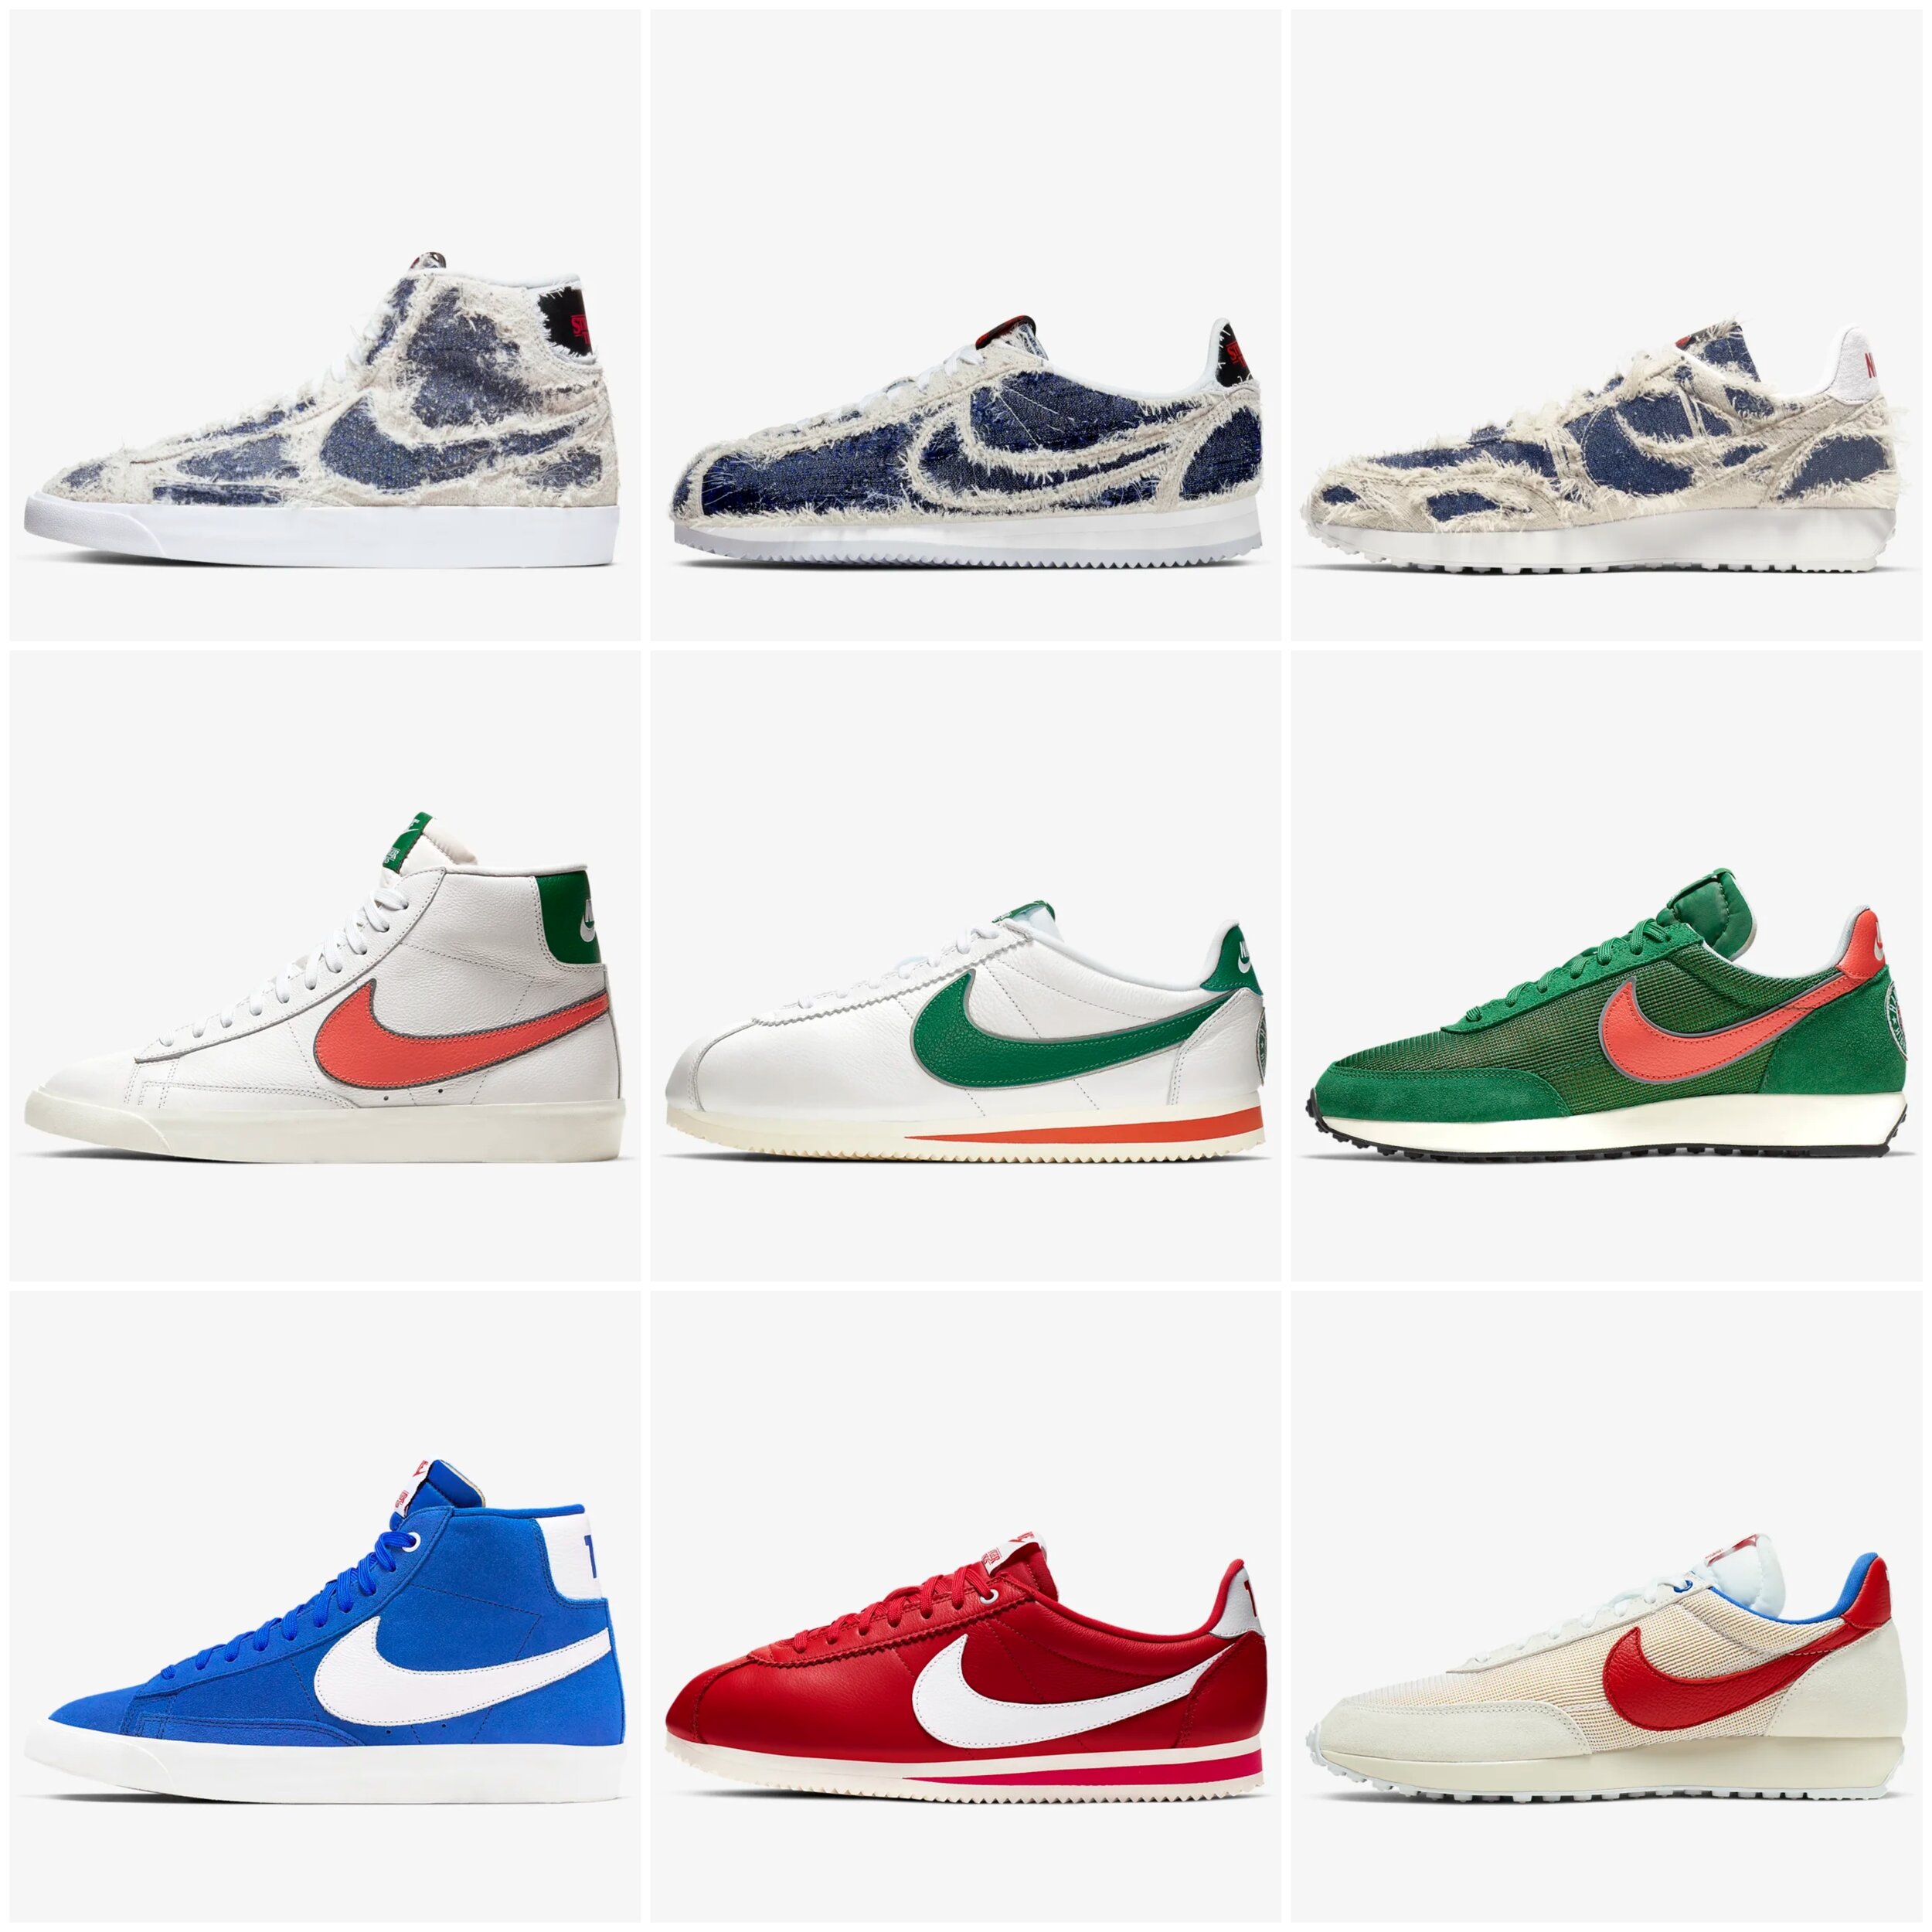 stranger things collection nike